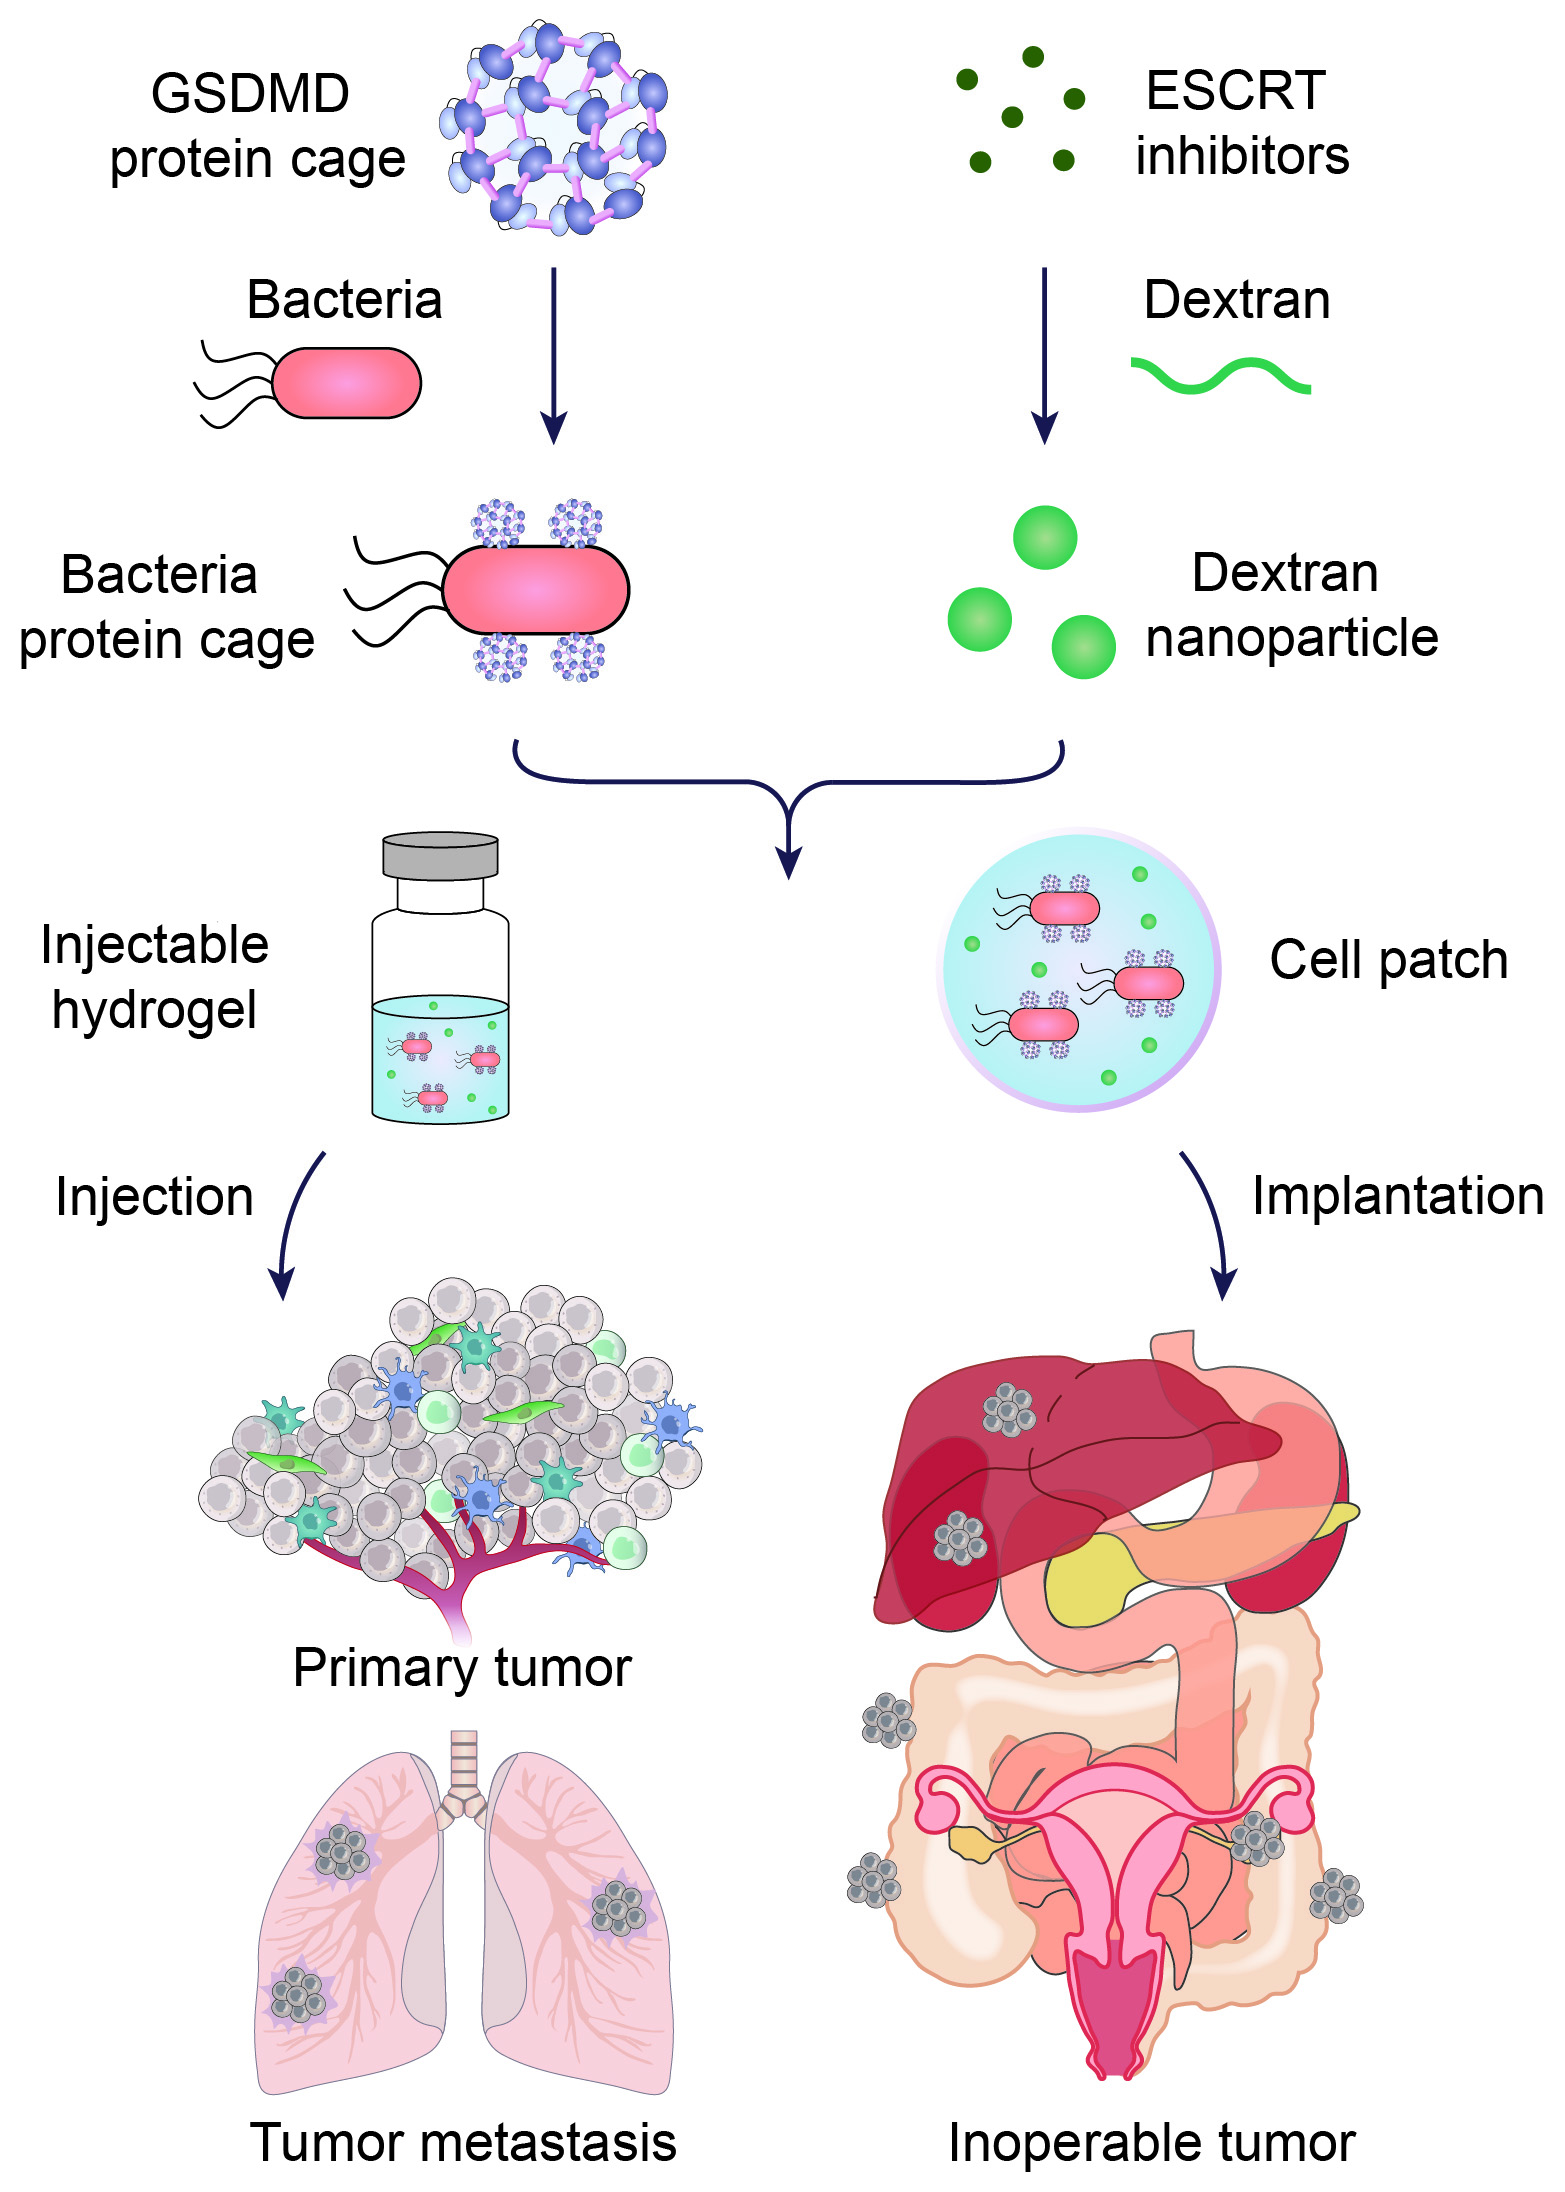 This schematic illustration shows Hu’s multipronged approach to improving immunotherapy for some cancers. The treatment relies on bacteria to deliver a protein (Gasdermin D) to trigger a form of cell death known as pyroptosis which elicits an immune response to the cancer. Another therapeutic encased in a tiny nanoparticle inhibits the cancer cells’ ability to repair themselves during pyroptosis.